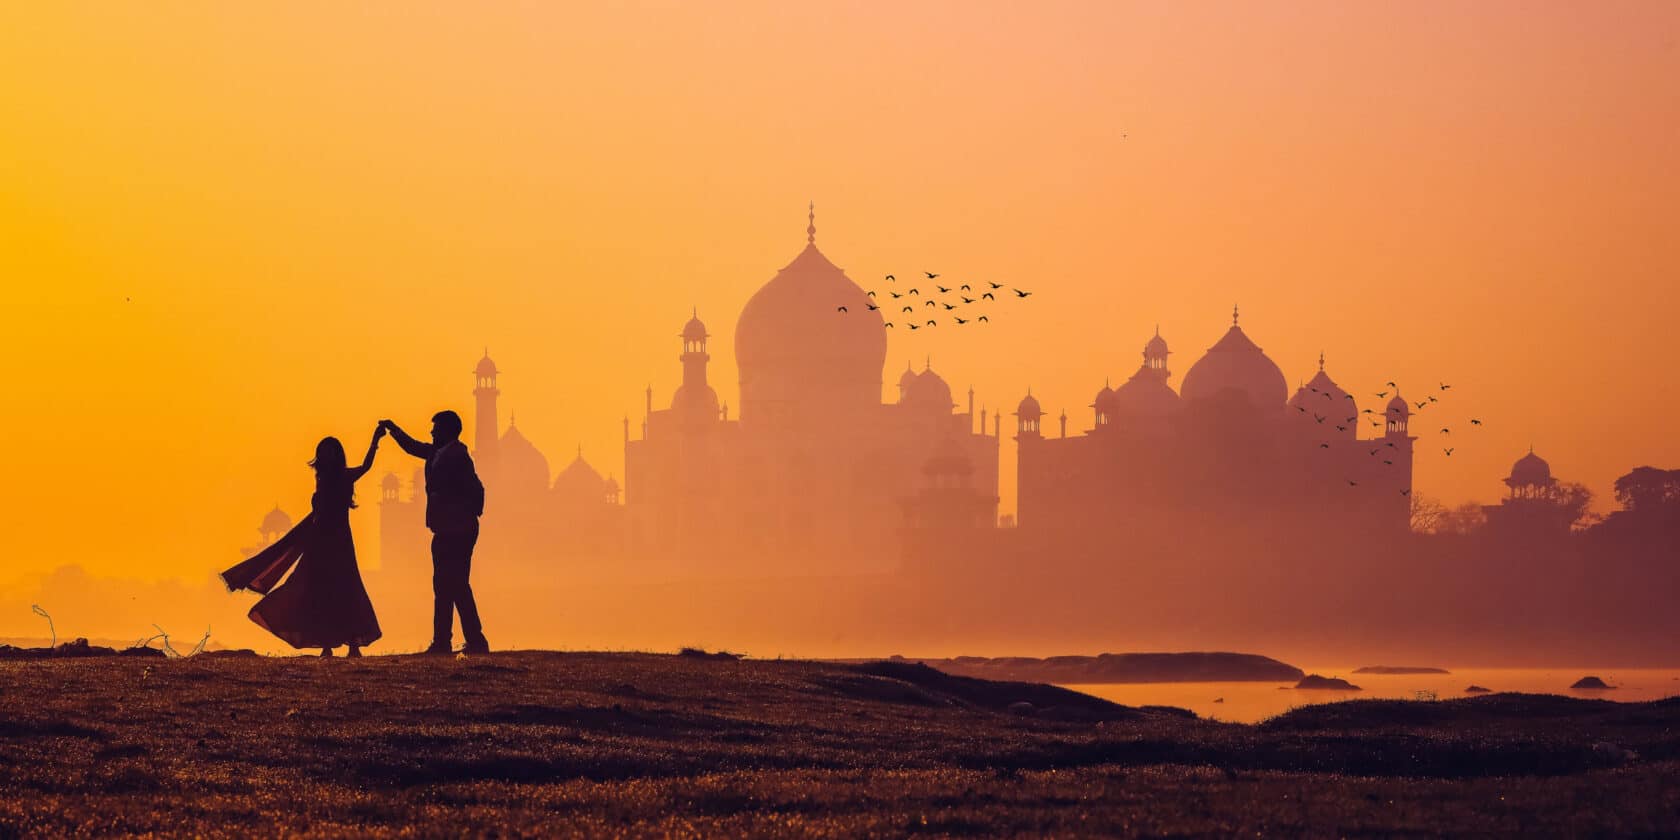 A couple dancing at sunset in India.